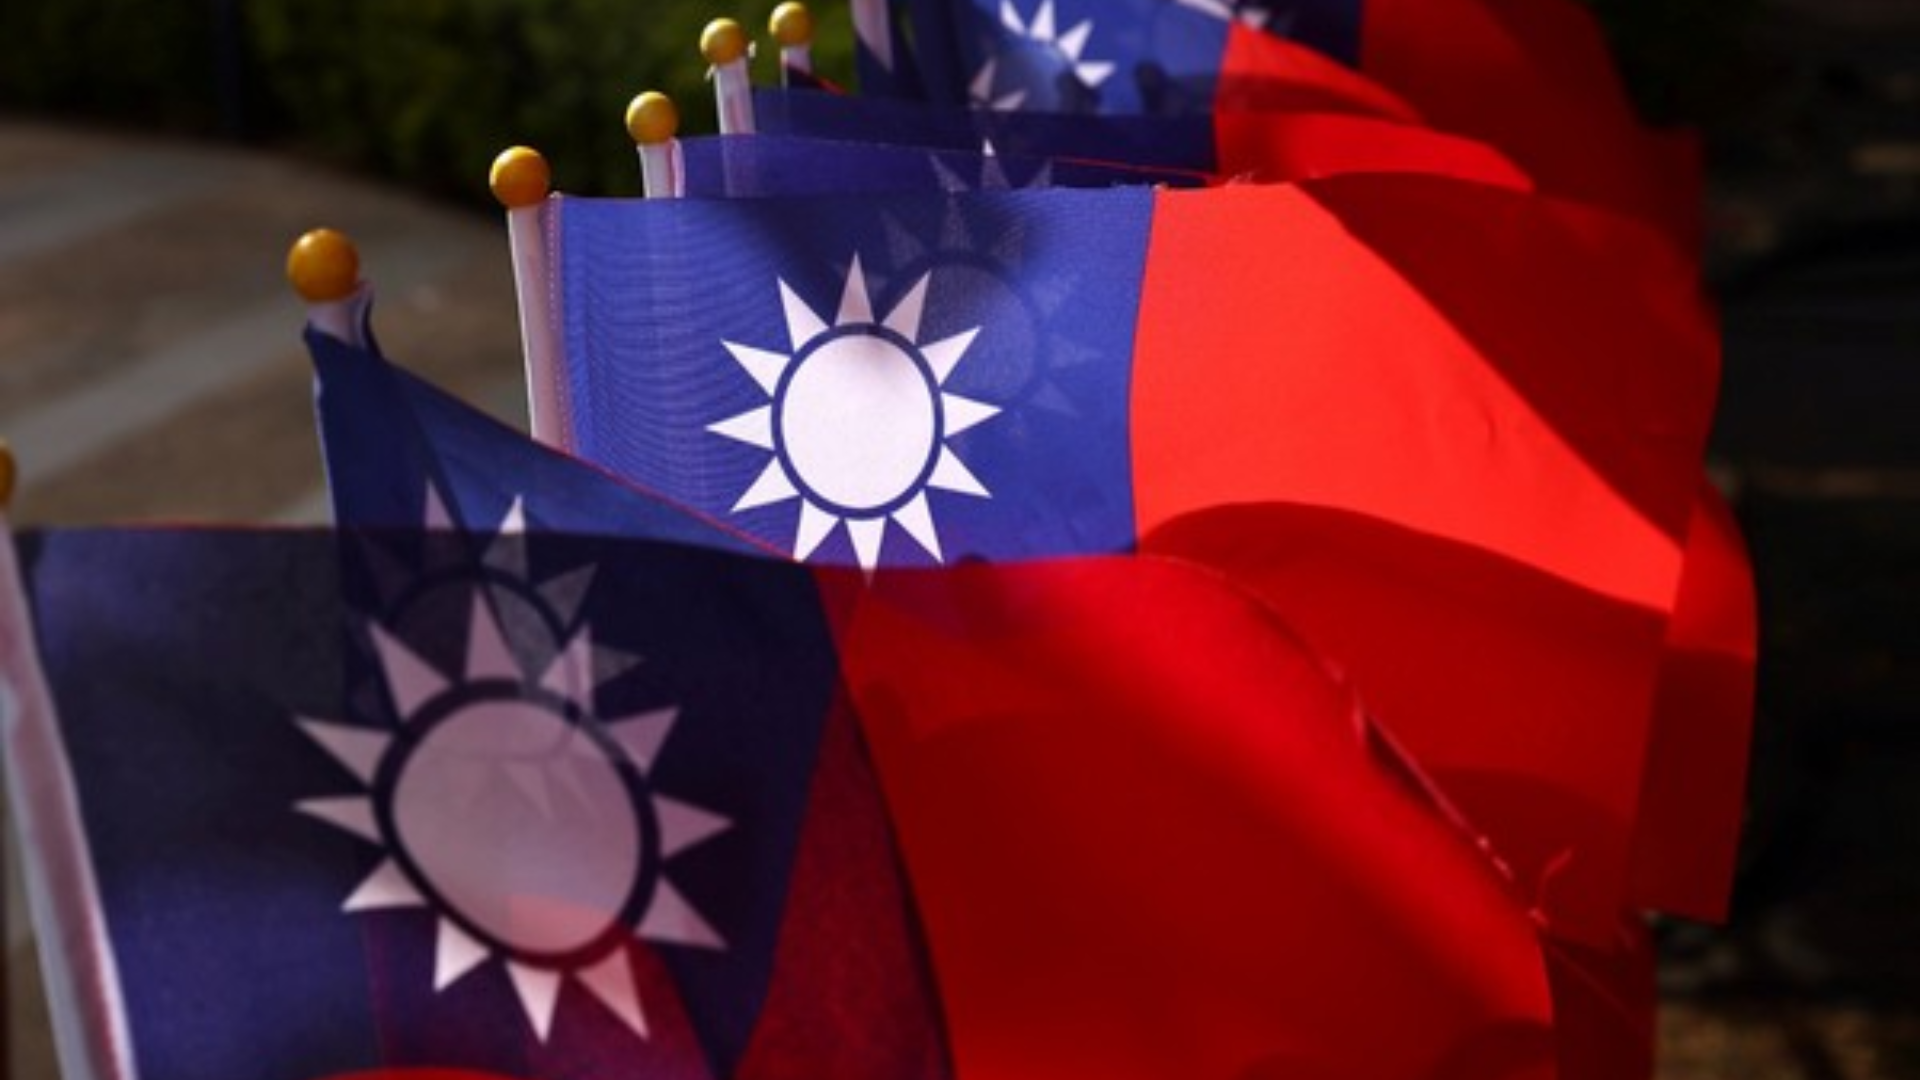 Taiwan Commences Presidential Polls with Over 19 Million Voters, Eyes Worldwide Attention